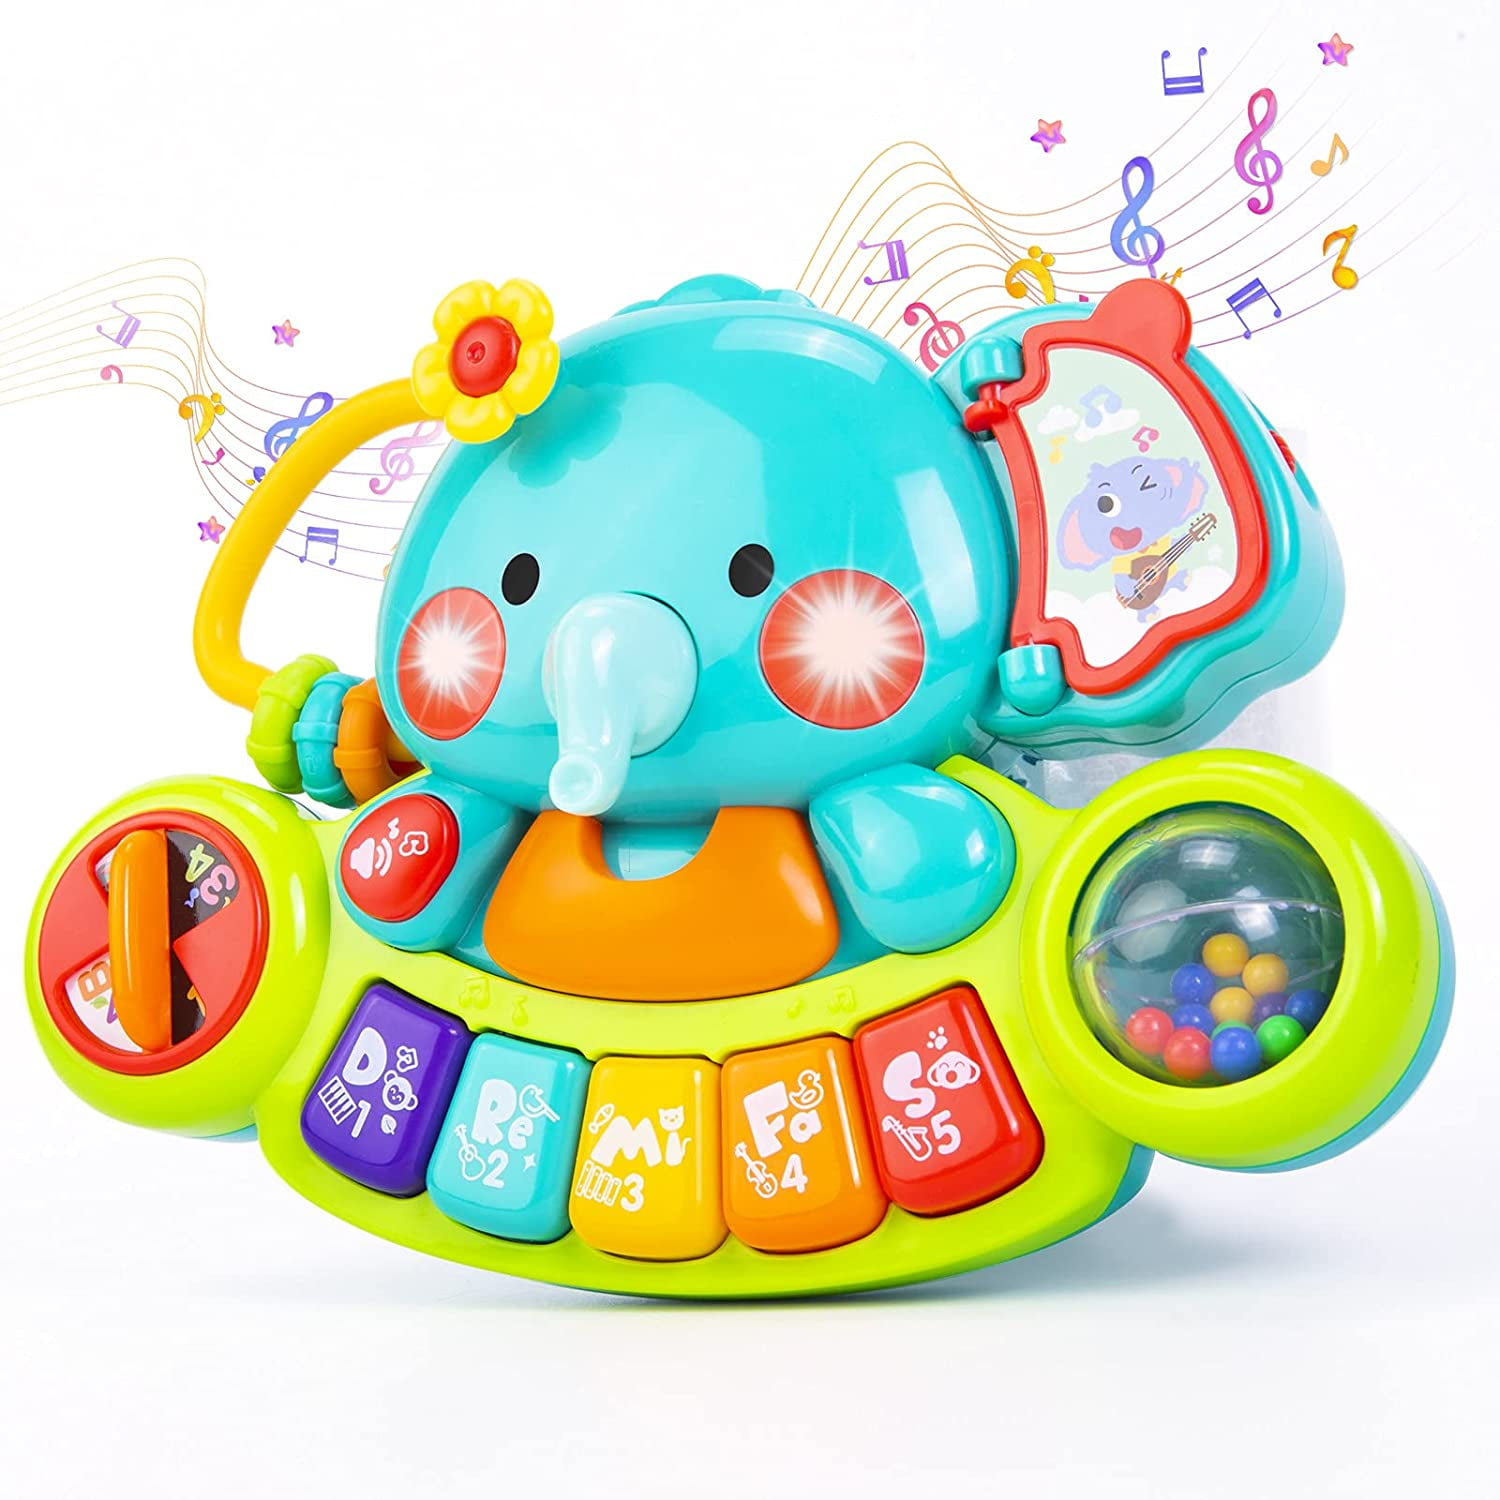 Baby Toys 6 12 Months Multifunctional, Chandeliers For Baby Boy Nursery Rhyme